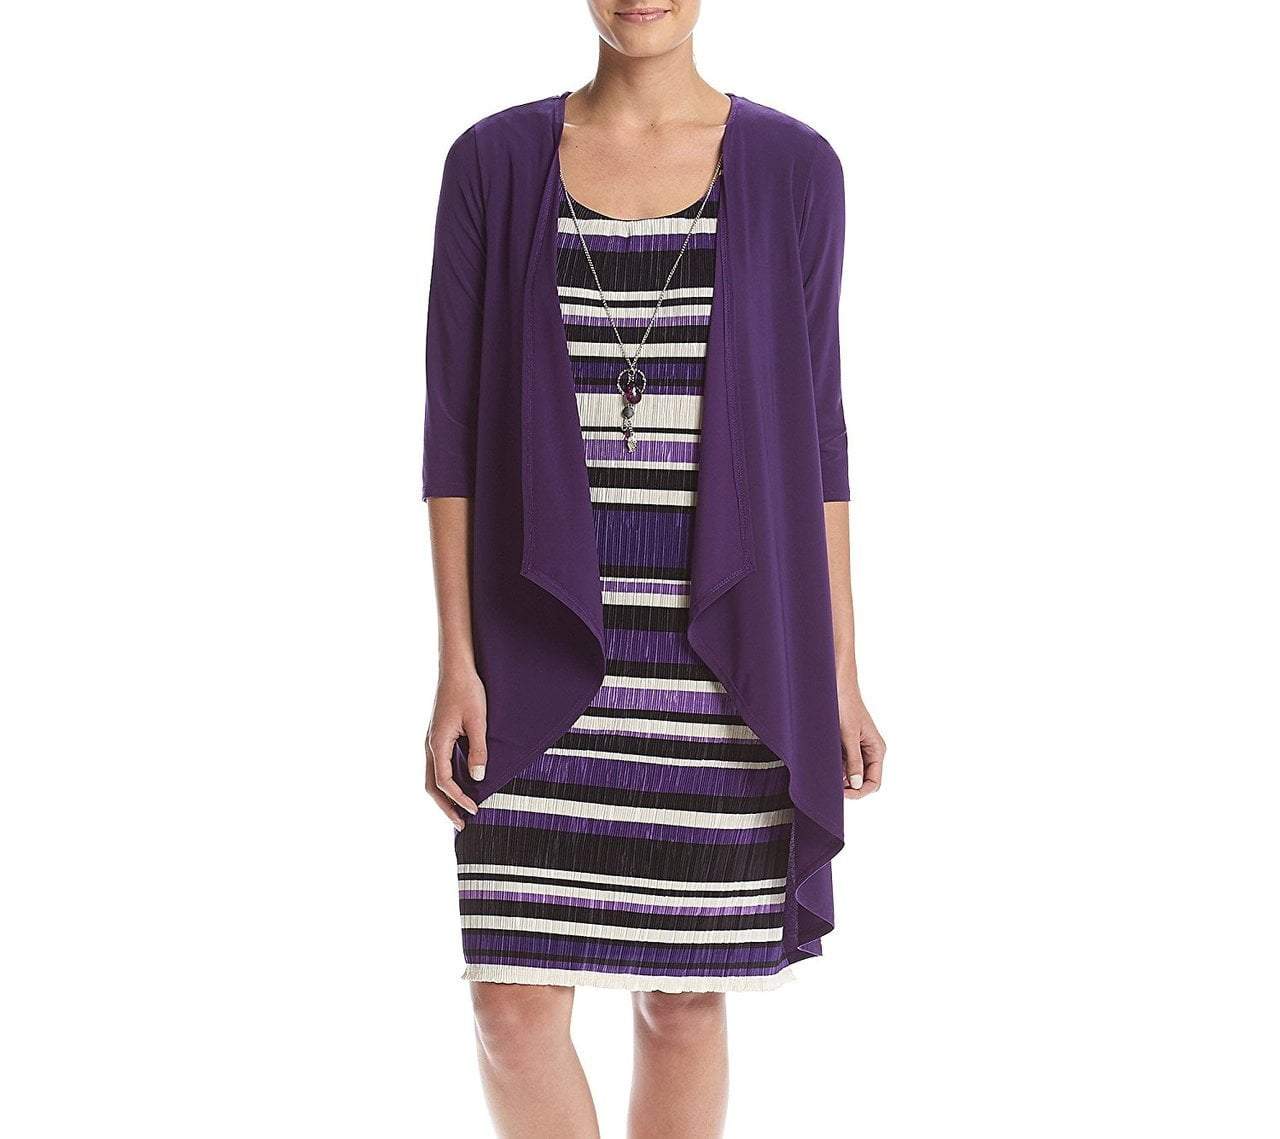 R&M Richards - 1577 Scoop Neck Striped Dress with Jacket in Purple